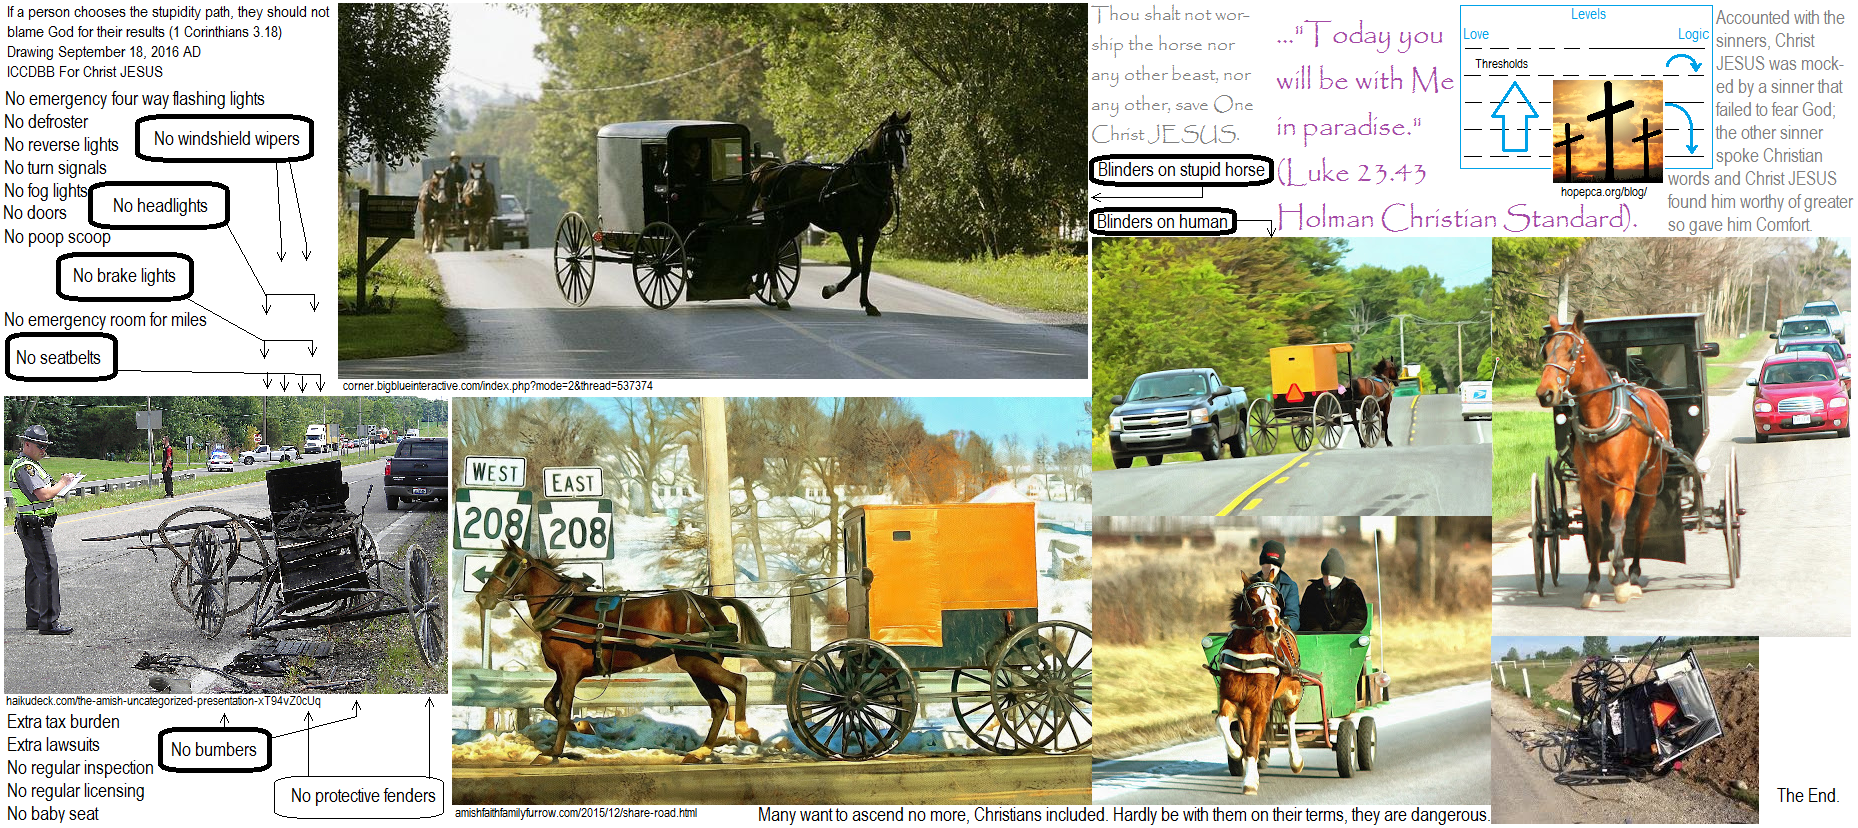 Amish follow stupid horses to carelessly cause deaths. Do not be careless, be for God In JESUS Christ. Do not be the cause of troubles against the self and innocent others. Be Christian, and yet be wise concerning how to properly ascend in the Heavenly realms in Christ JESUS